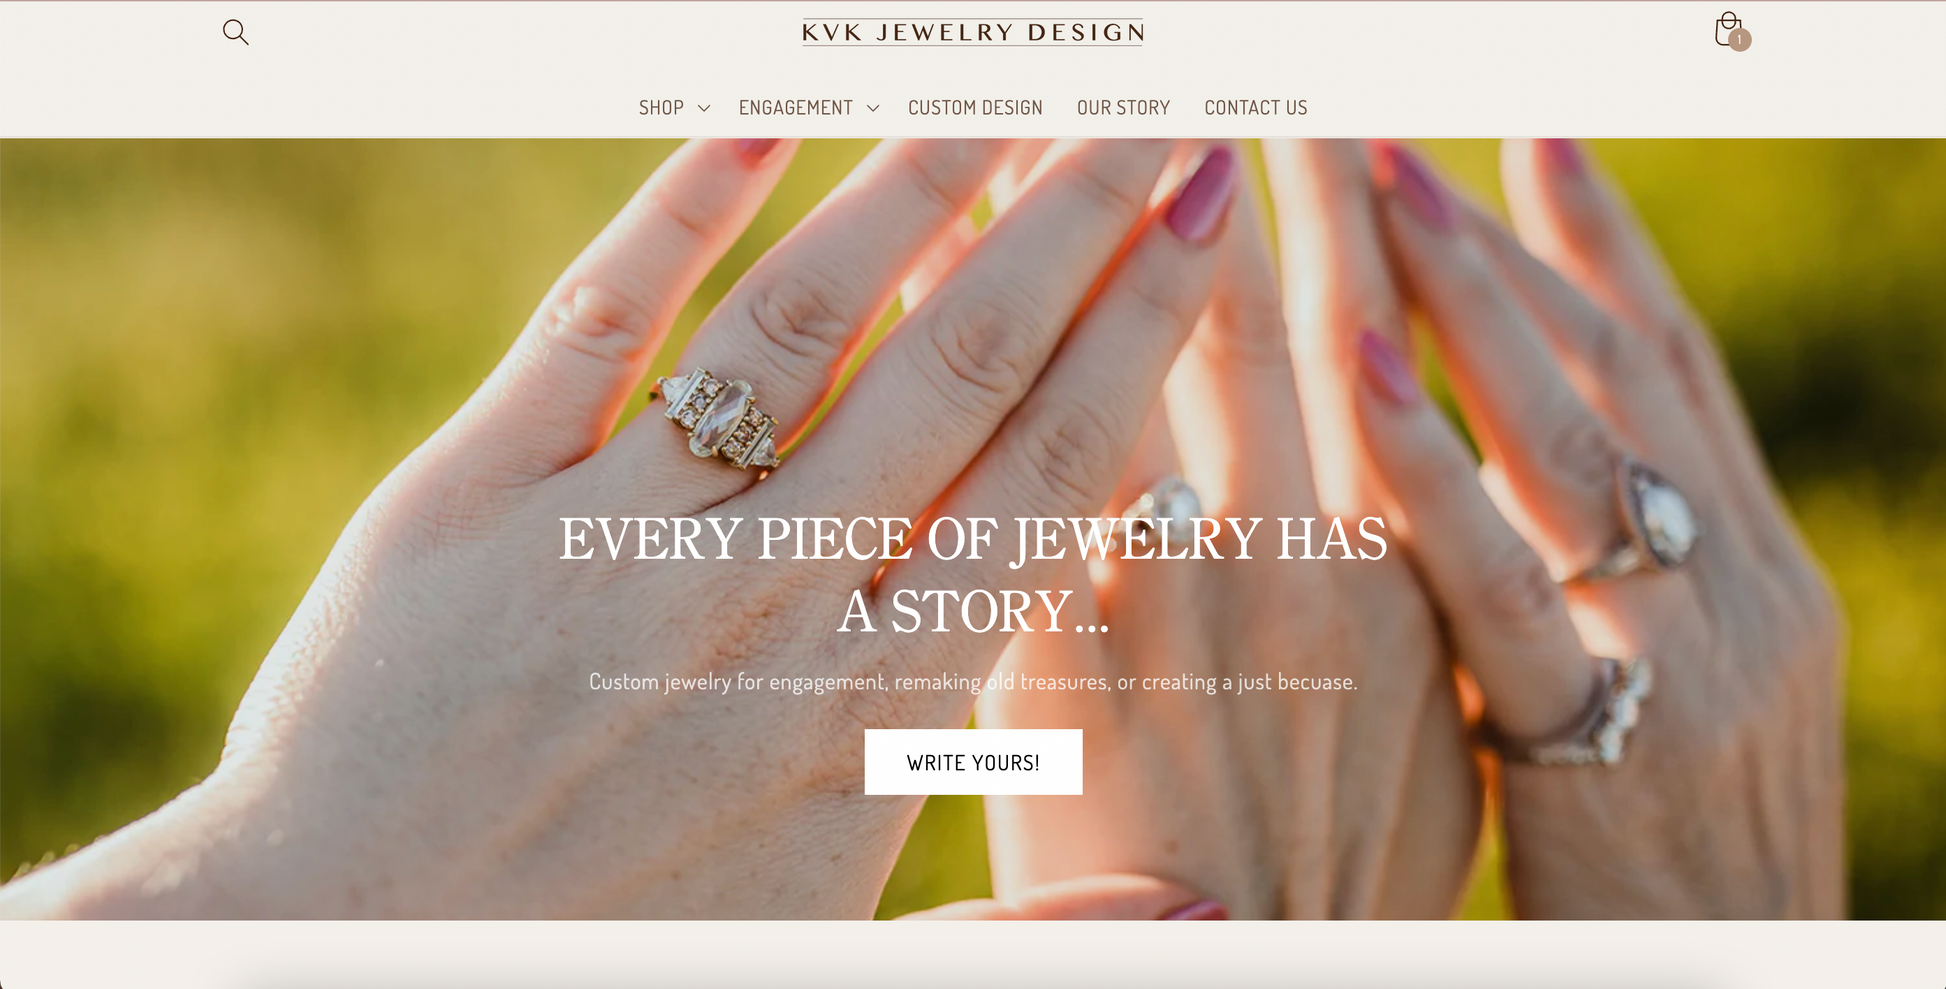 Custom jewelry featured products for KVK Jewelry Design-a website designed by 29TH DESIGN